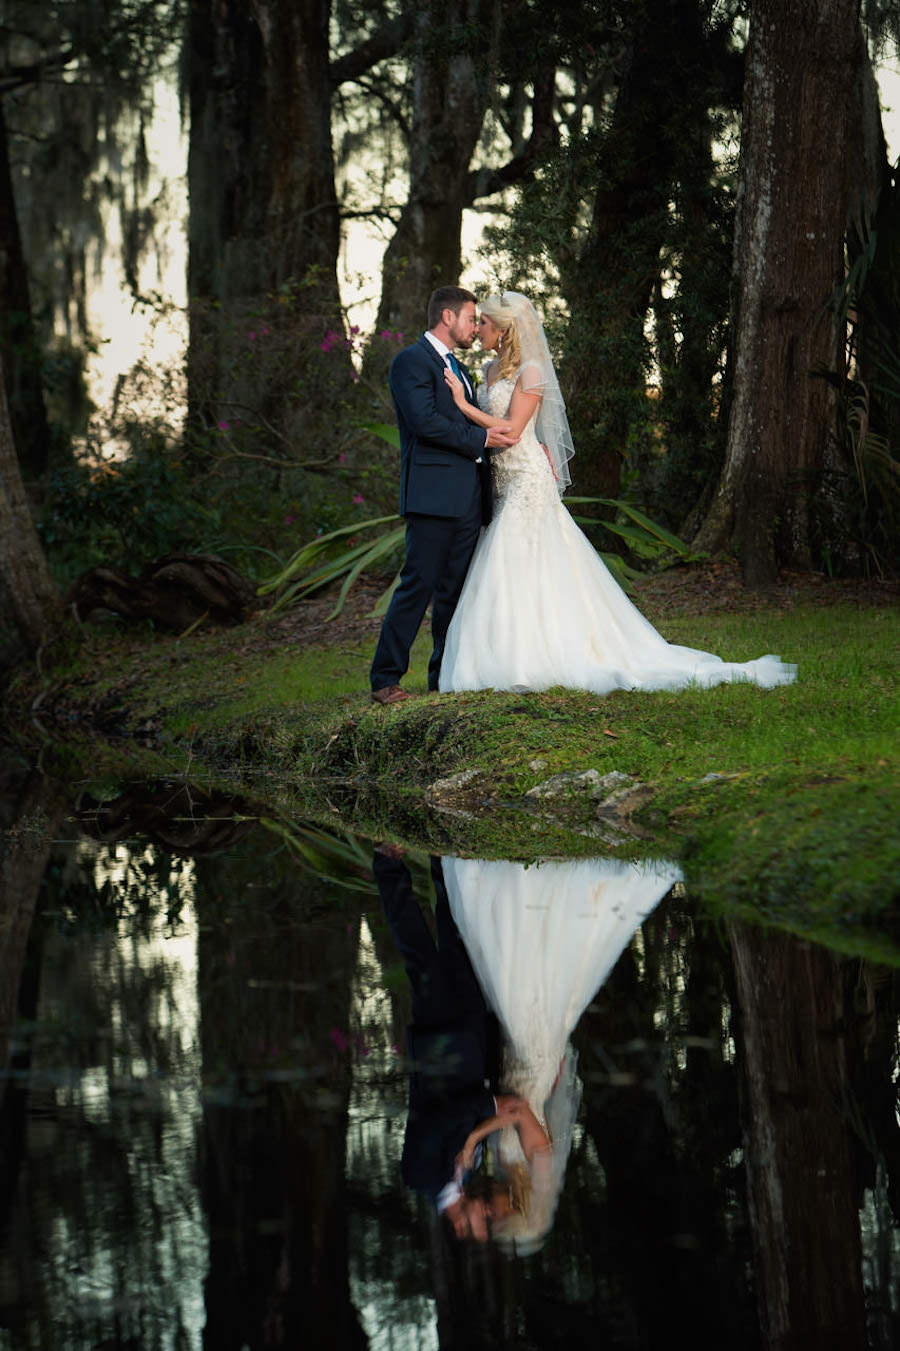 Bride and Groom, Outdoor Bridal Wedding Portrait by Lake with Reflection | Plant City Wedding Photographer Jeff Mason Photography